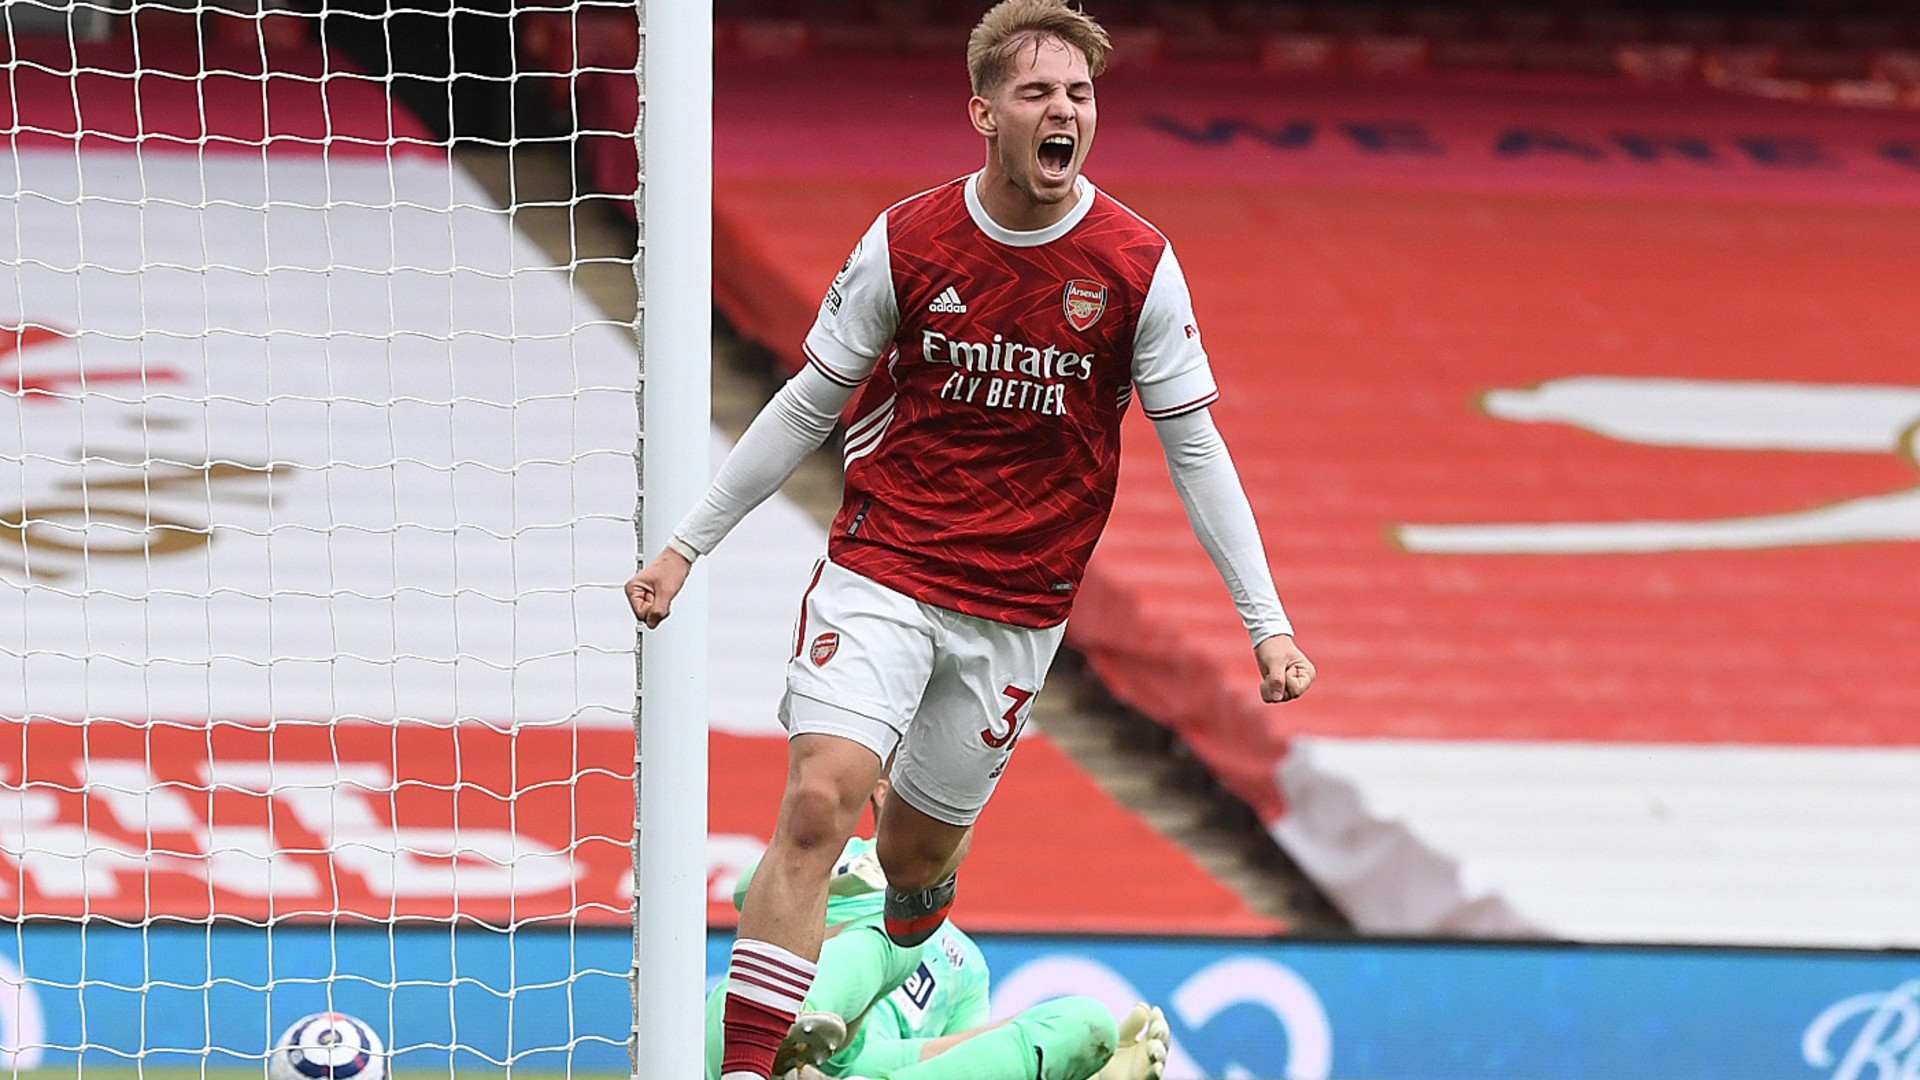 Emil Rowe opened the scoring for Arsenal in the 3-1 win against West Brom; Credit: Twitter/@Arsenal